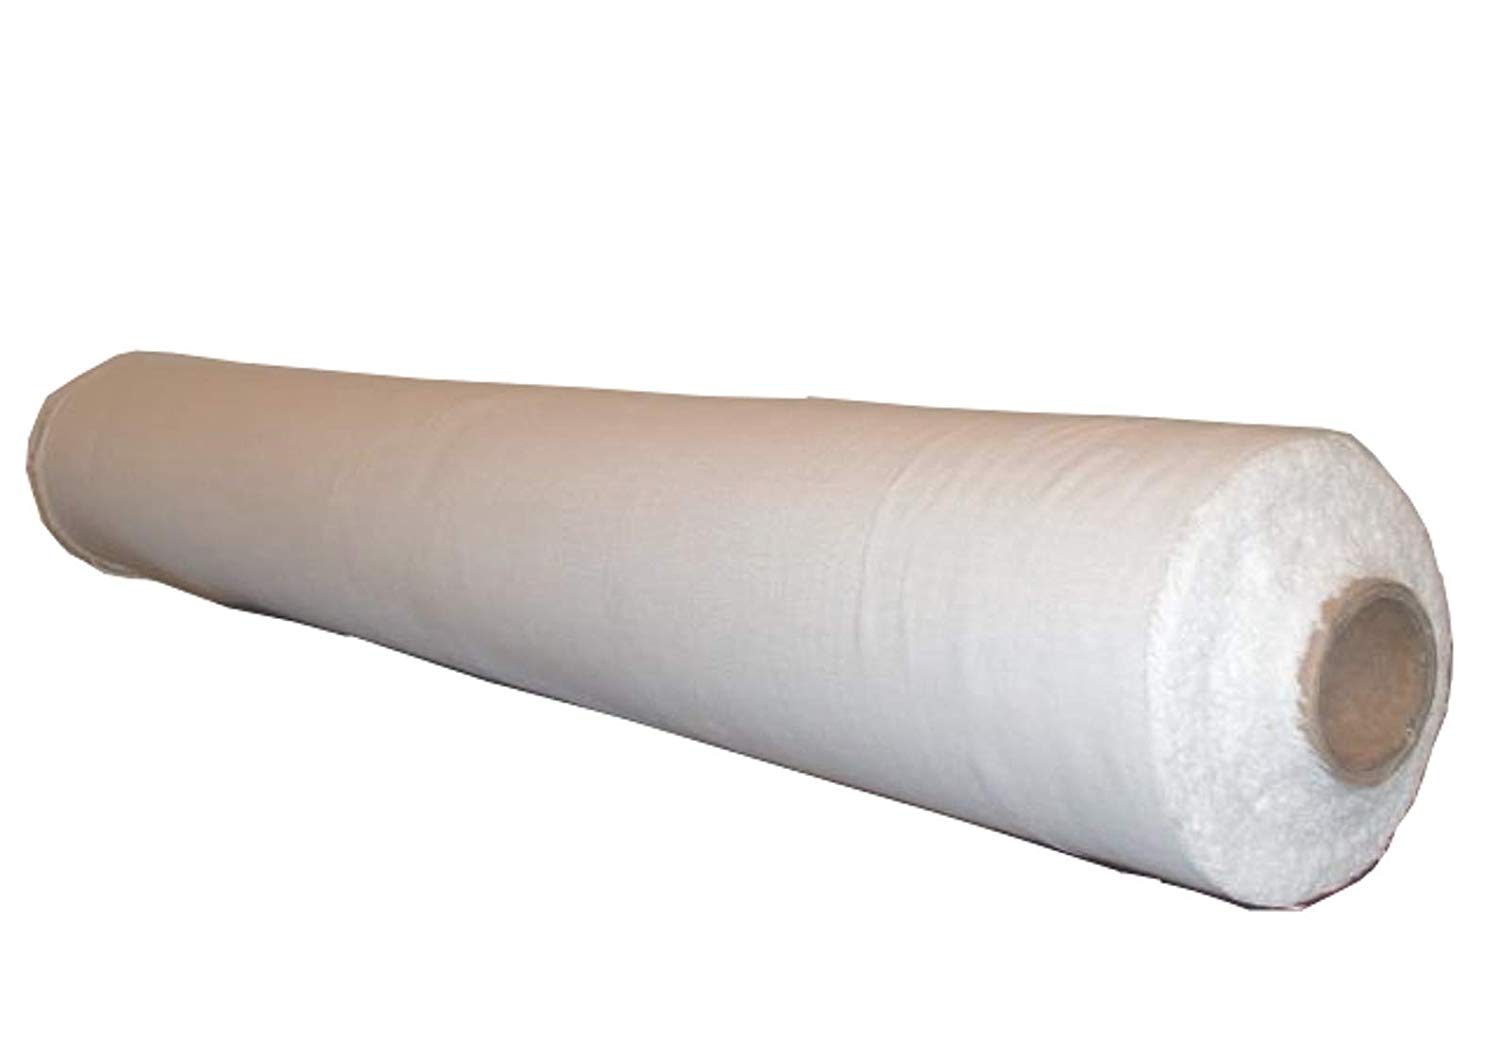 36" Width Grade 90 Cheesecloth 100 Yard Roll - Bleached